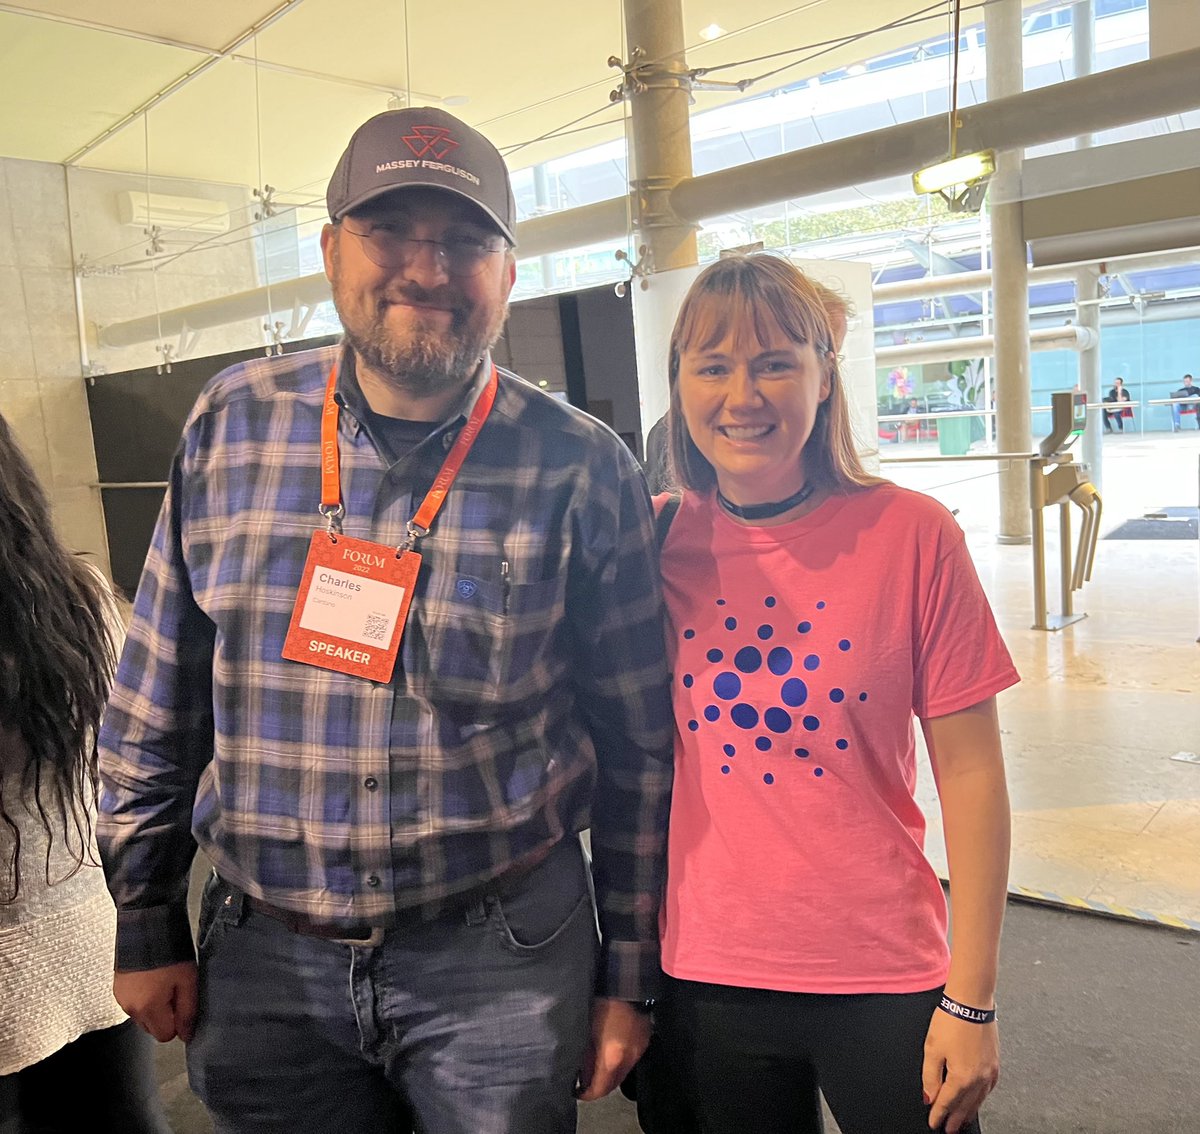 Finally got to meet the man, the myth, the legend @IOHK_Charles at #WebSummit2022 wearing a T-shirt that my mom hand-made for me! Charles was so kind to the crowd who waited to see him after his speech! Thank you for all you do, Charles!